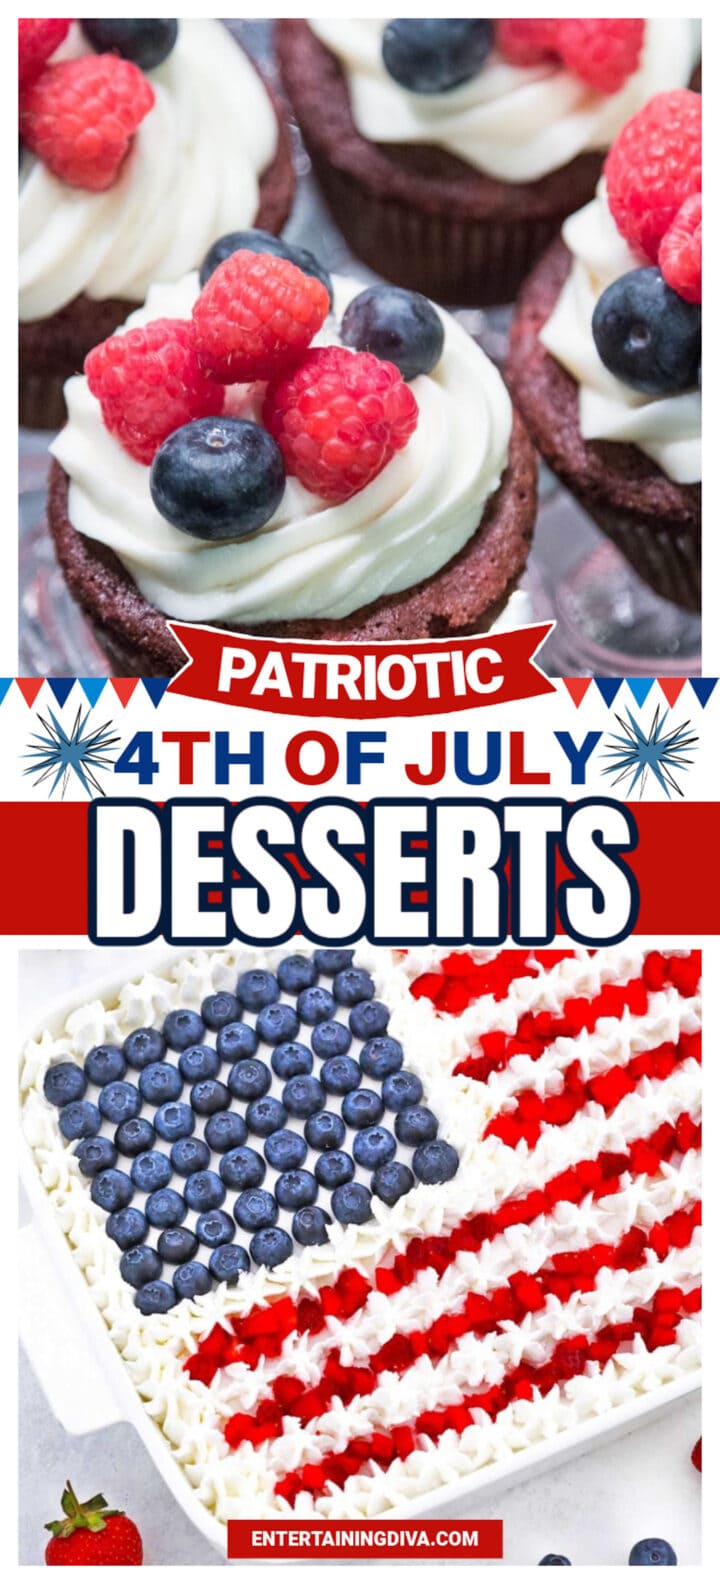 78 Patriotic Red, White and Blue Desserts For The 4th of July